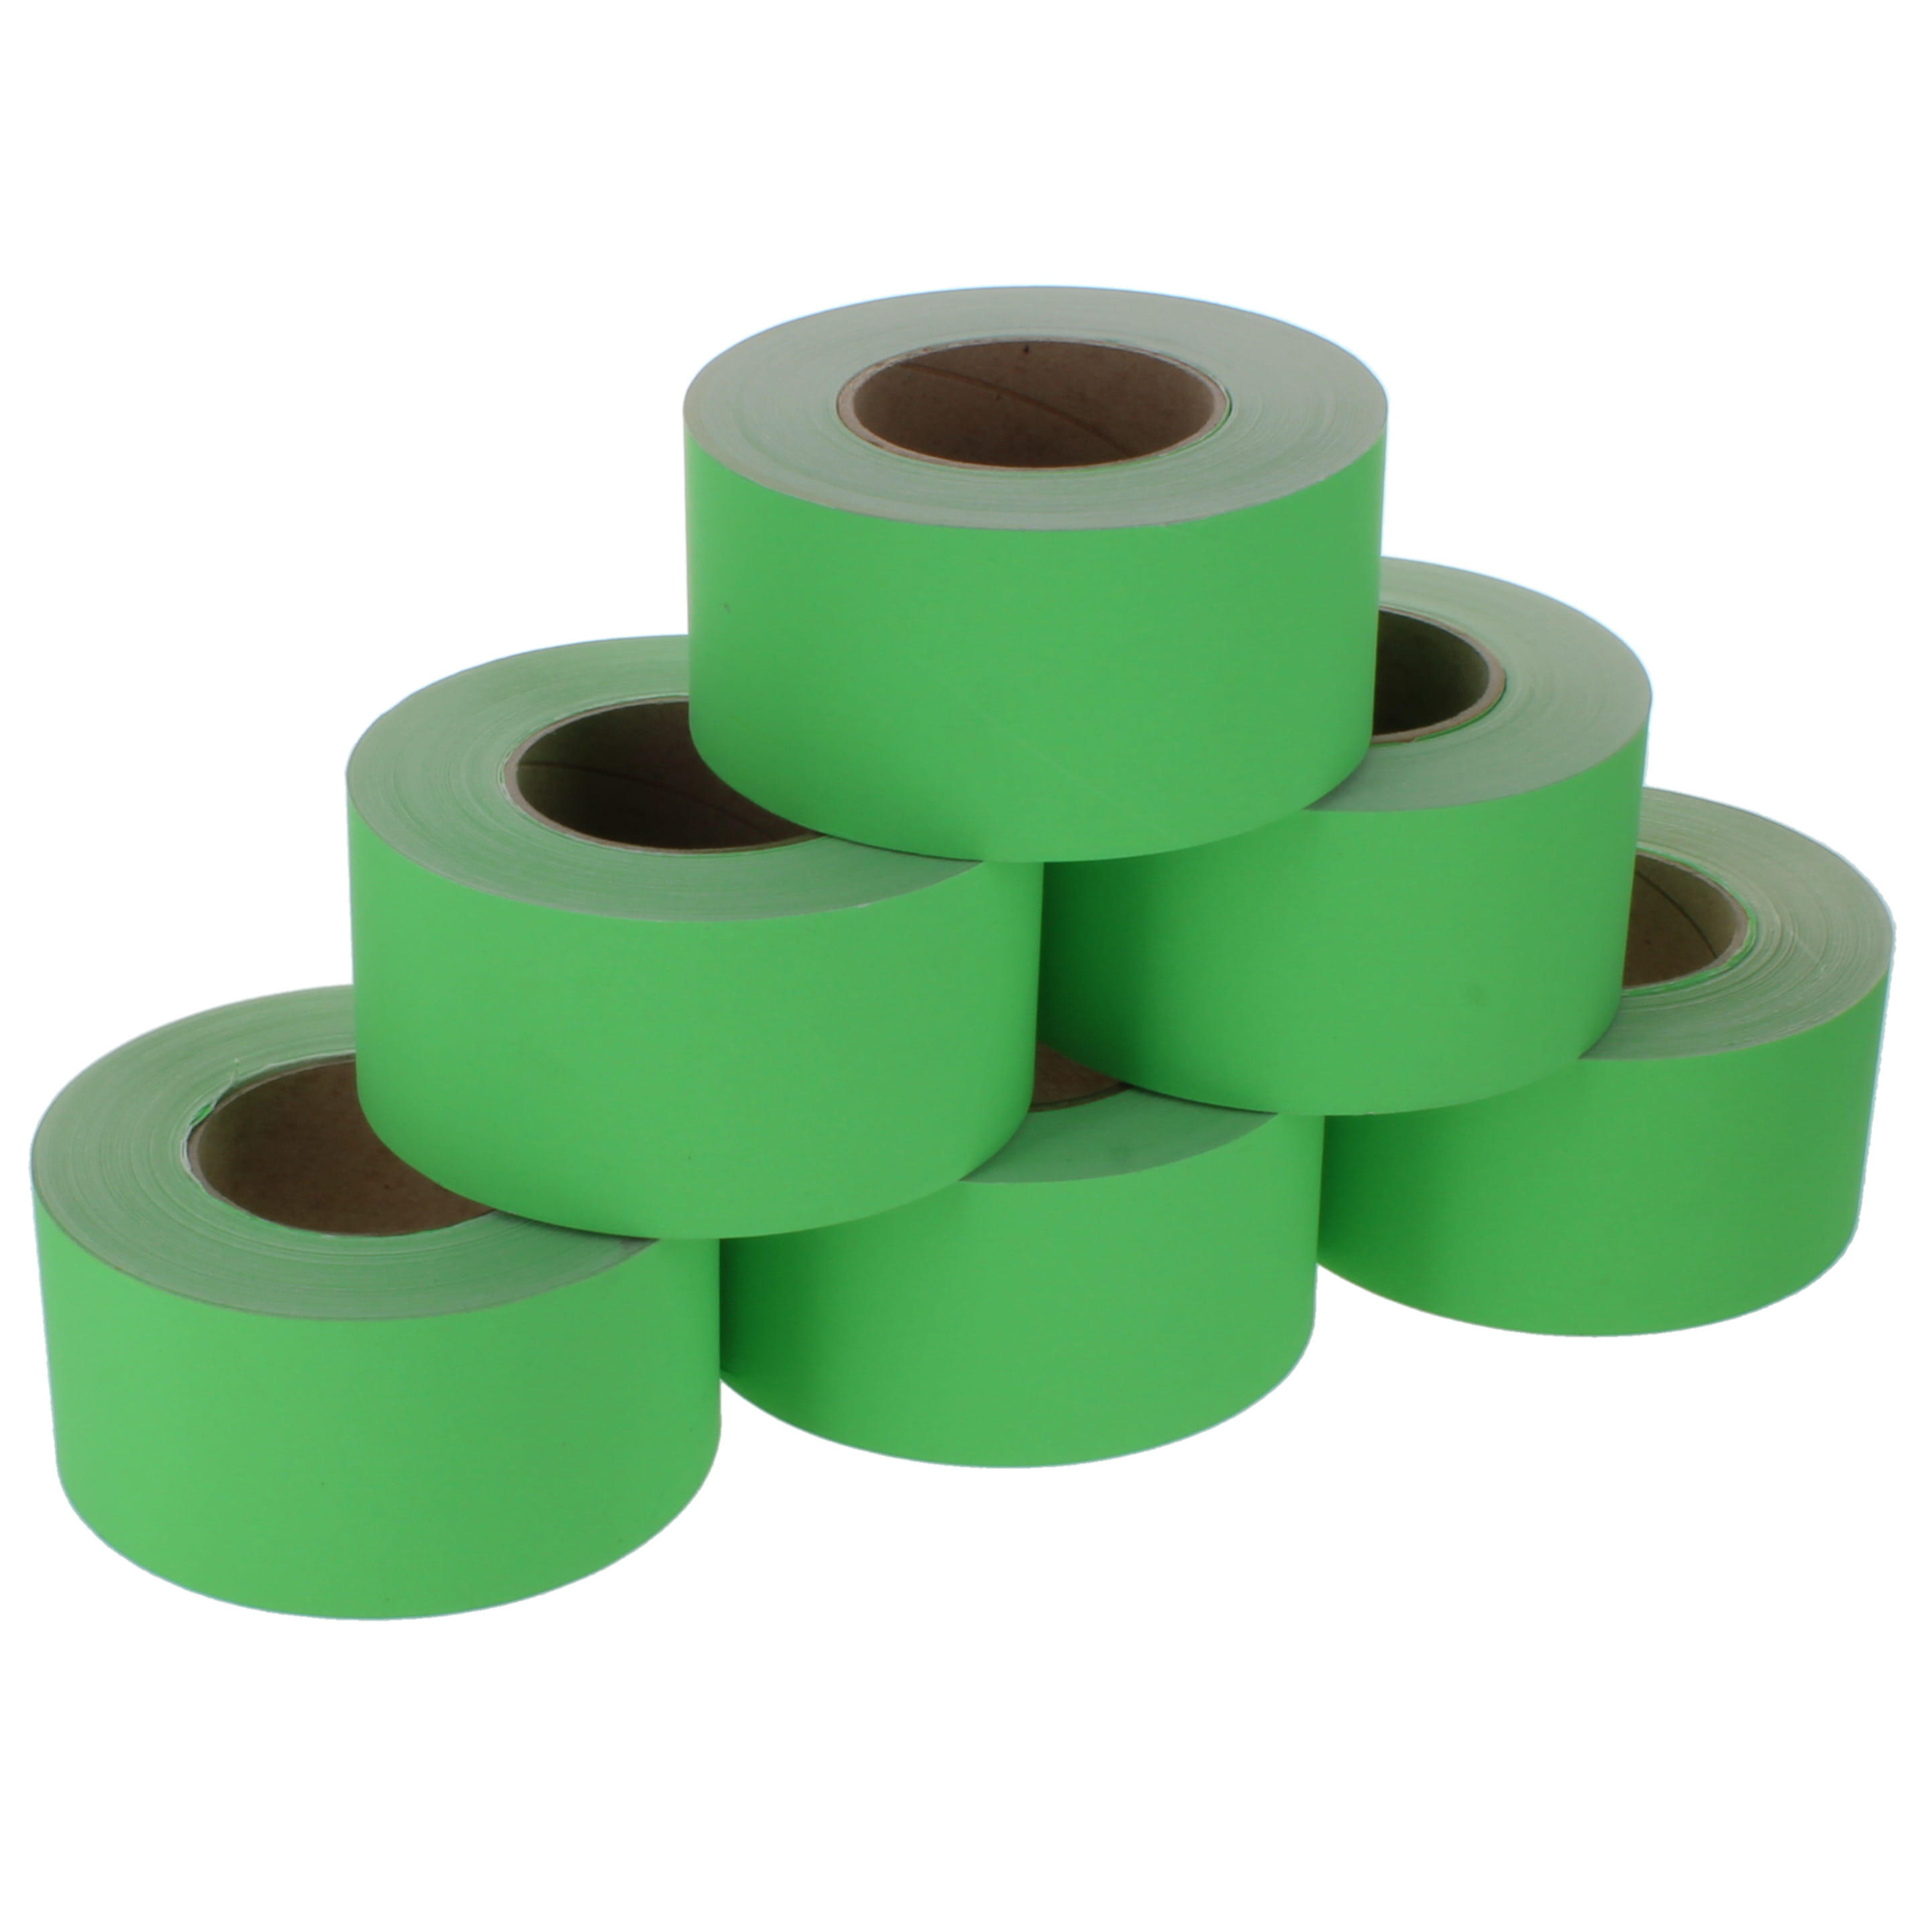 Paper Border Rolls Straight Edge Pale Green 48mm x 50m - pack of 6